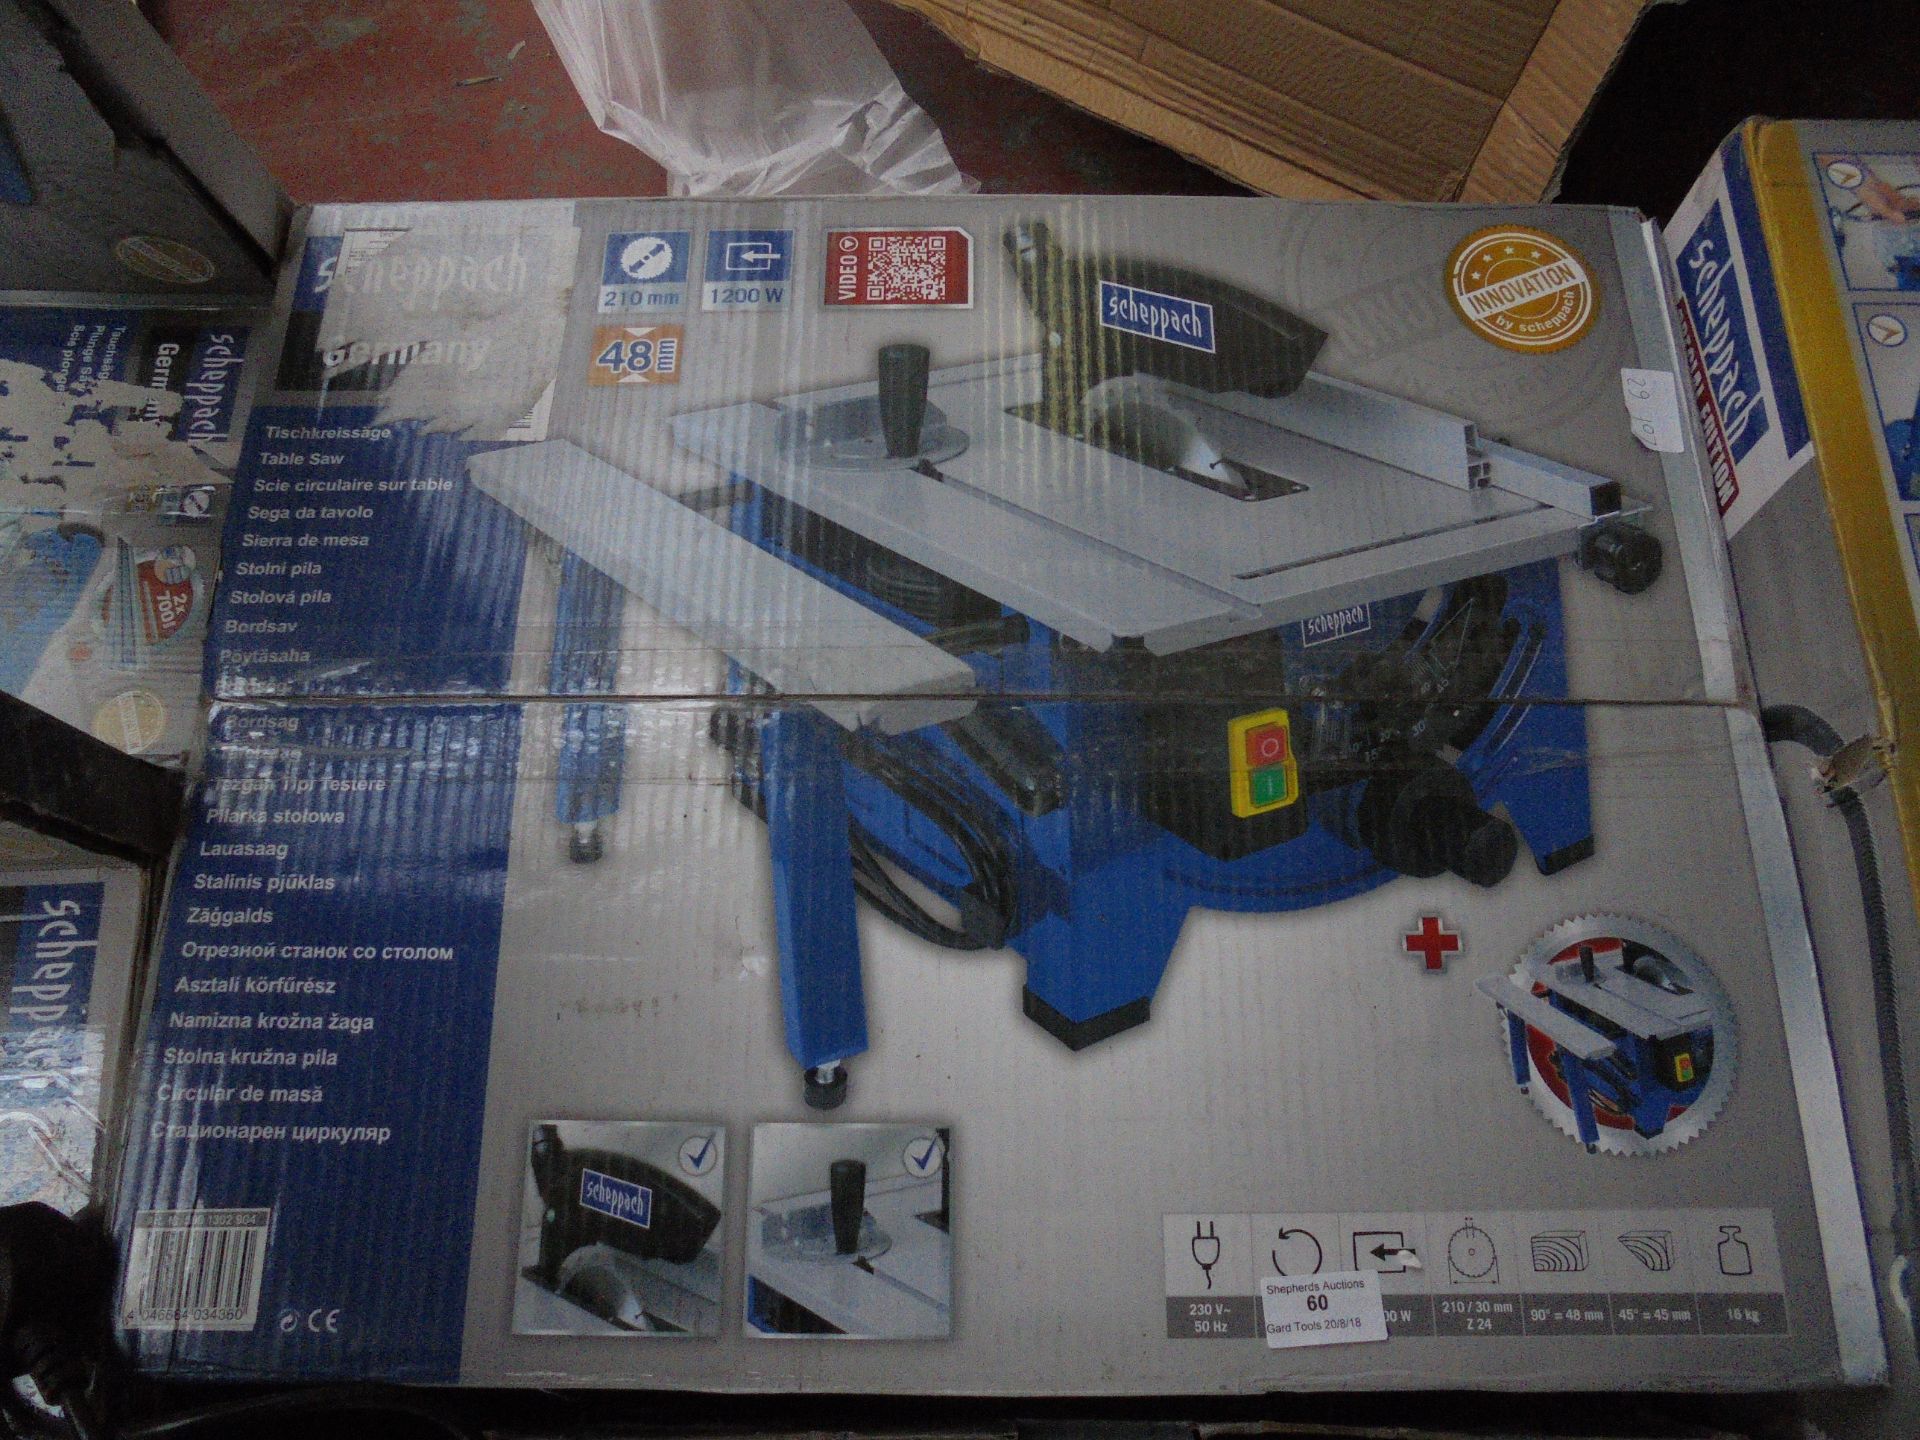 Scheppach HS80 8" table saw RRP £129.95, tested working and boxed (17kg)